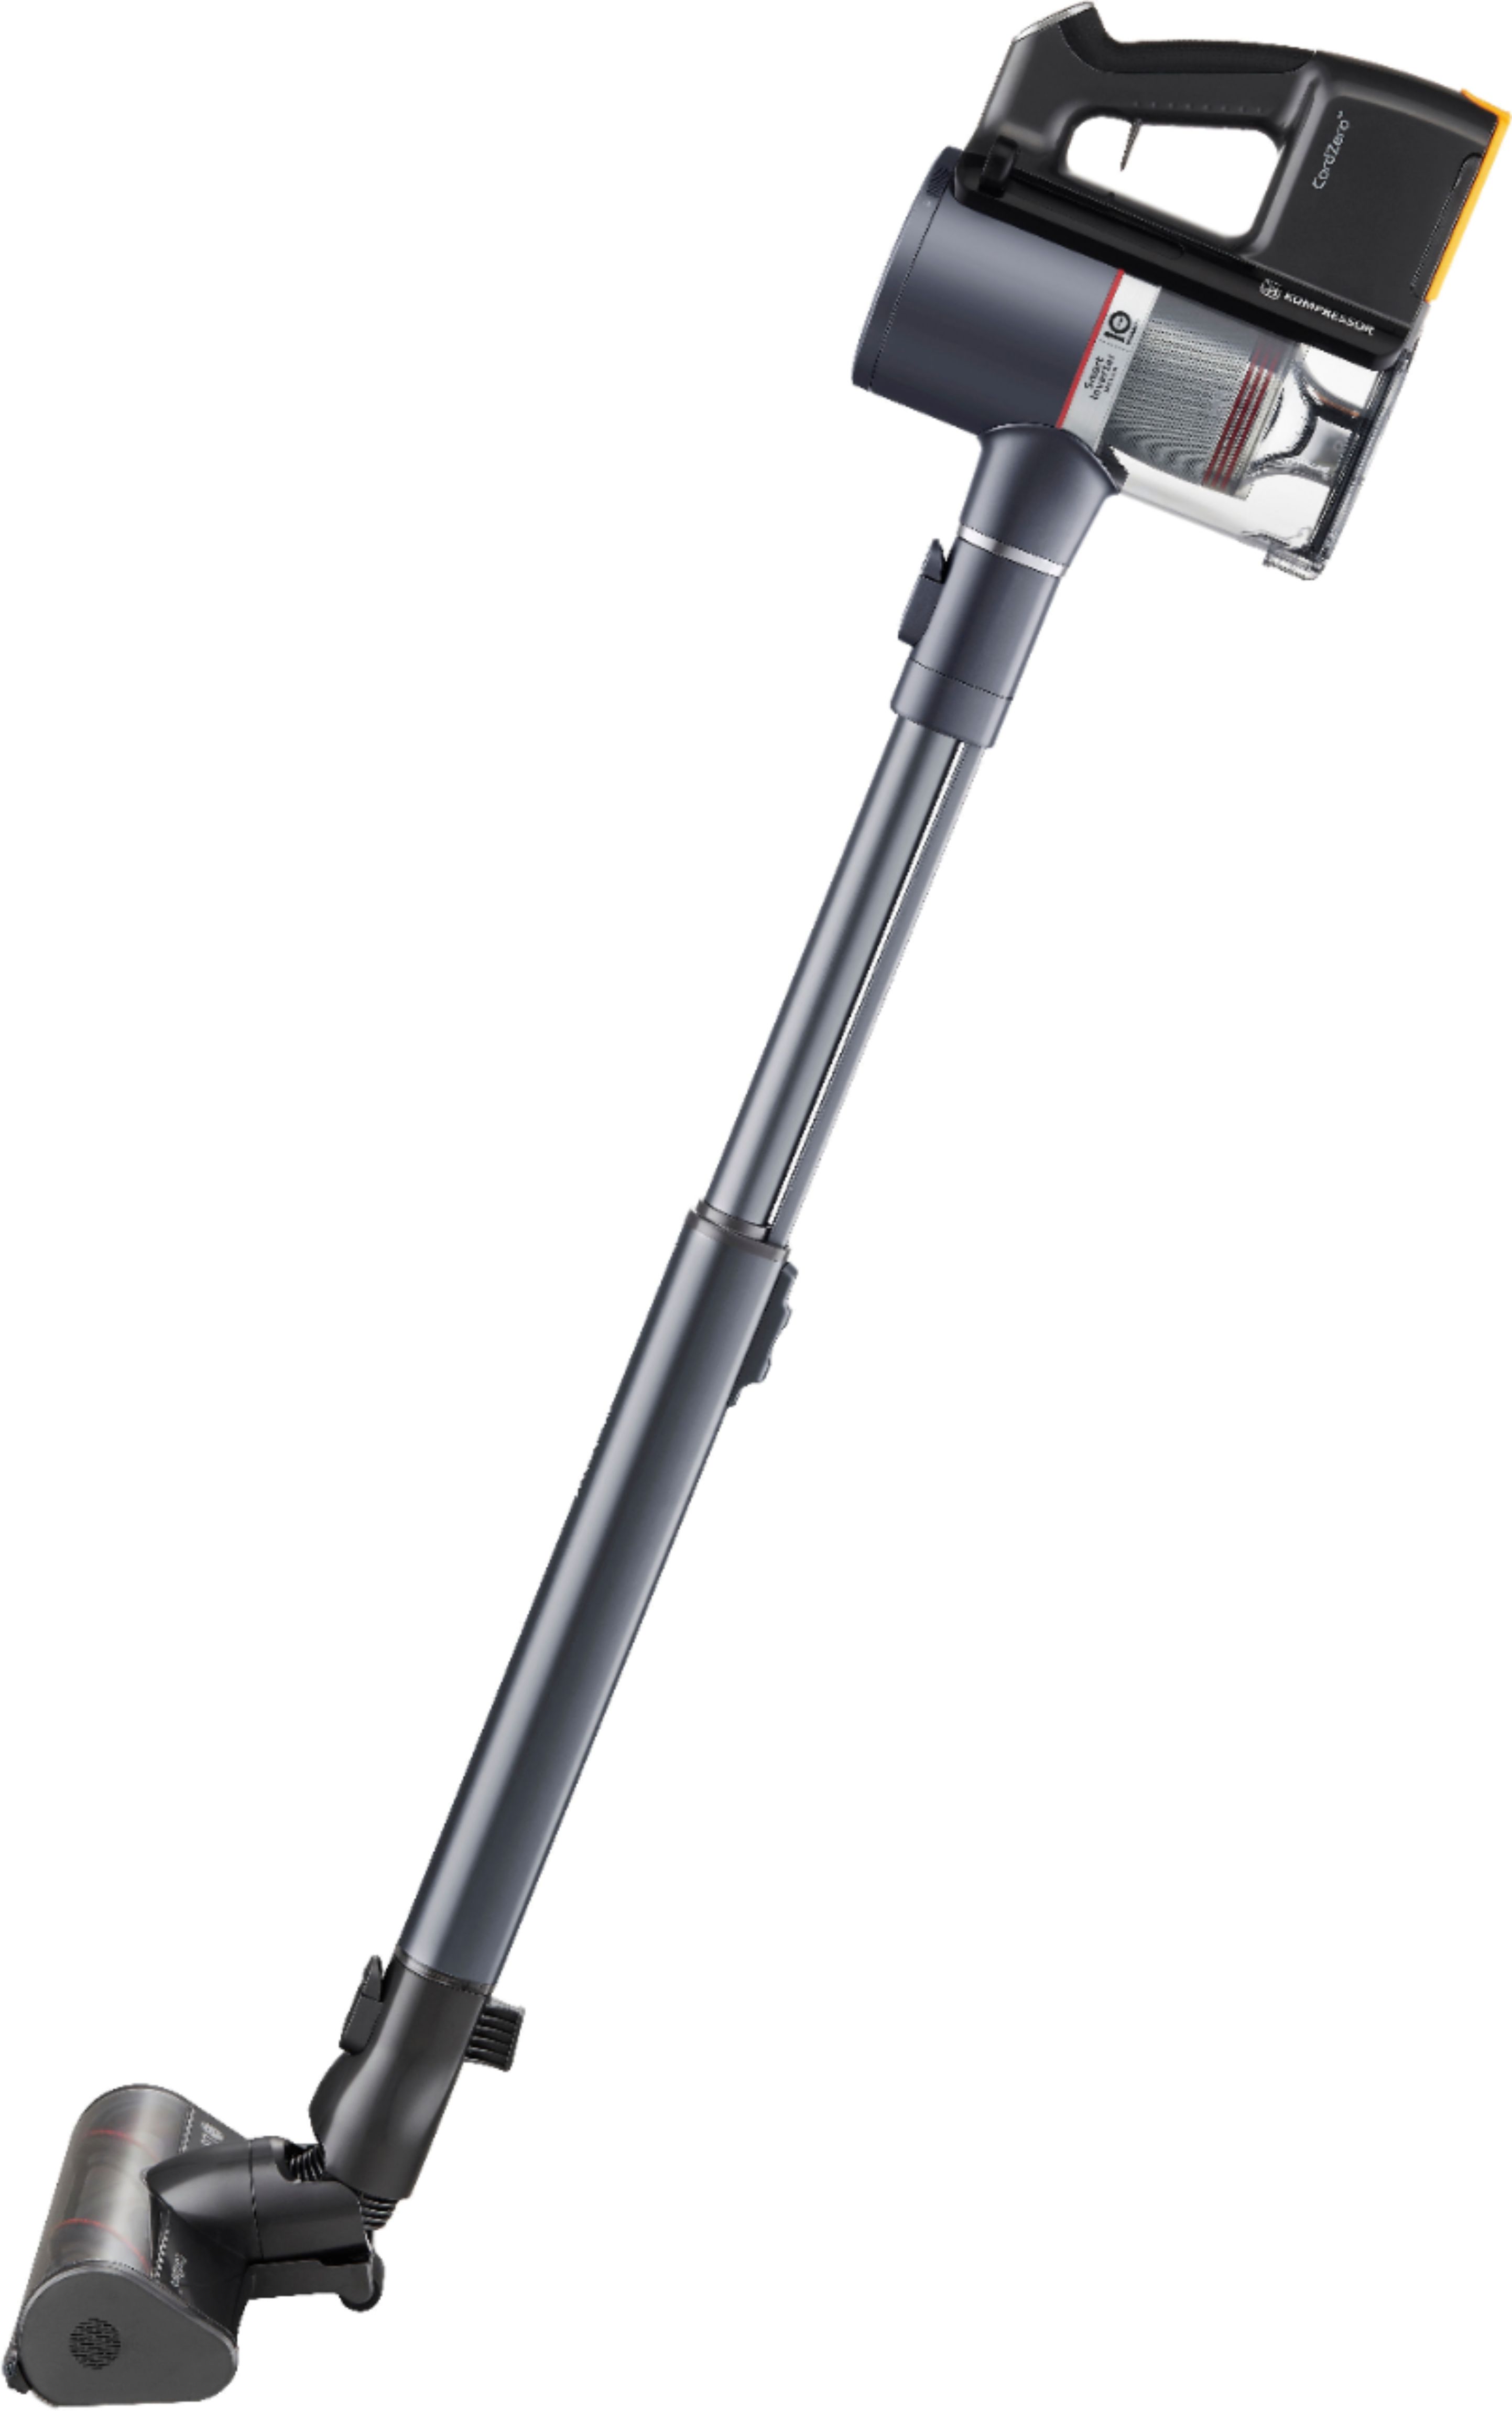 Left View: Samsung - Jet™ 70 Pet Cordless Stick Vacuum with Lightweight Design - Airborne with Violet Filter